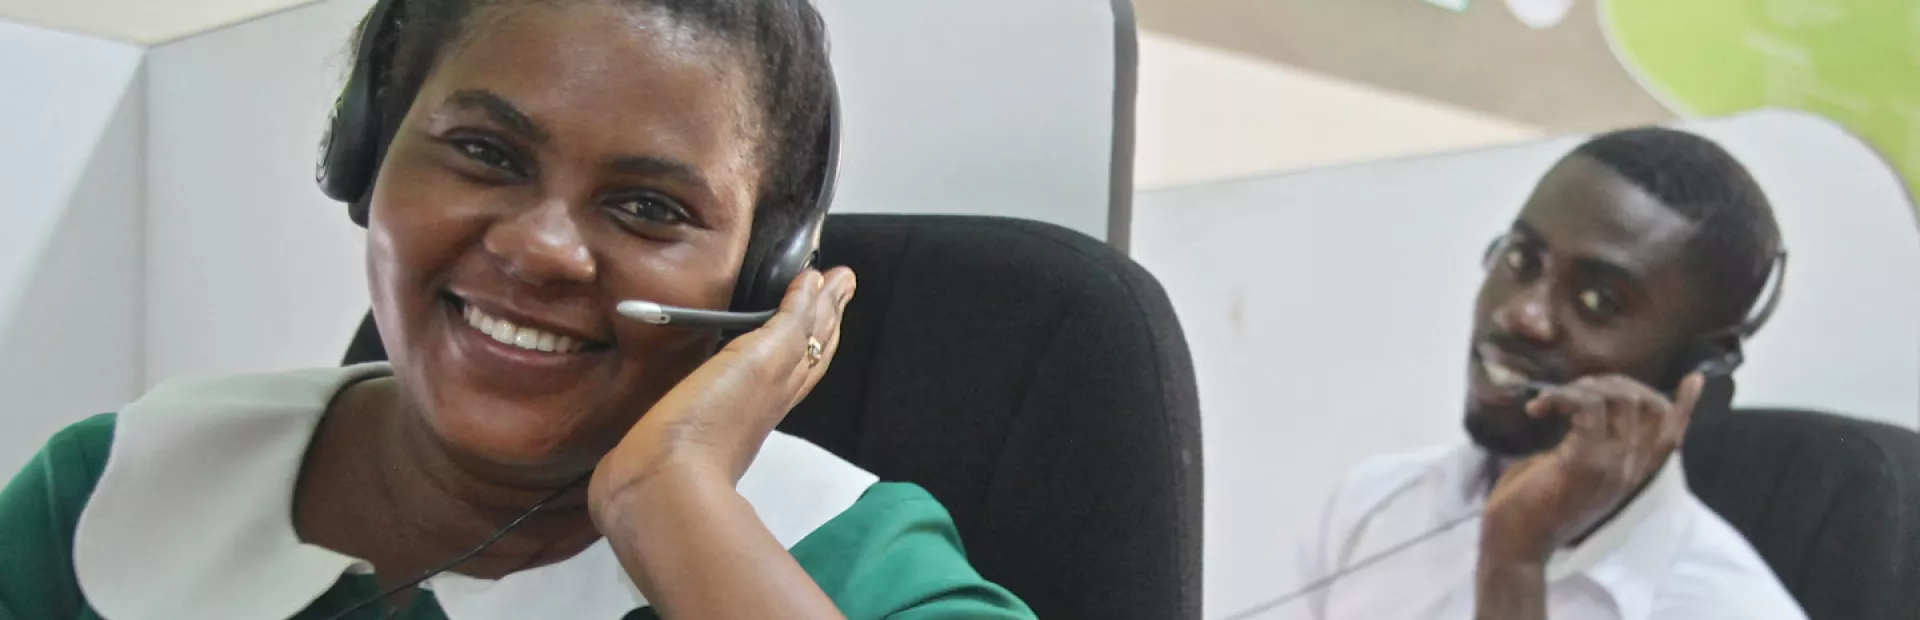 Image showing two telemedicine employees in Ghana with headsets at their workplace